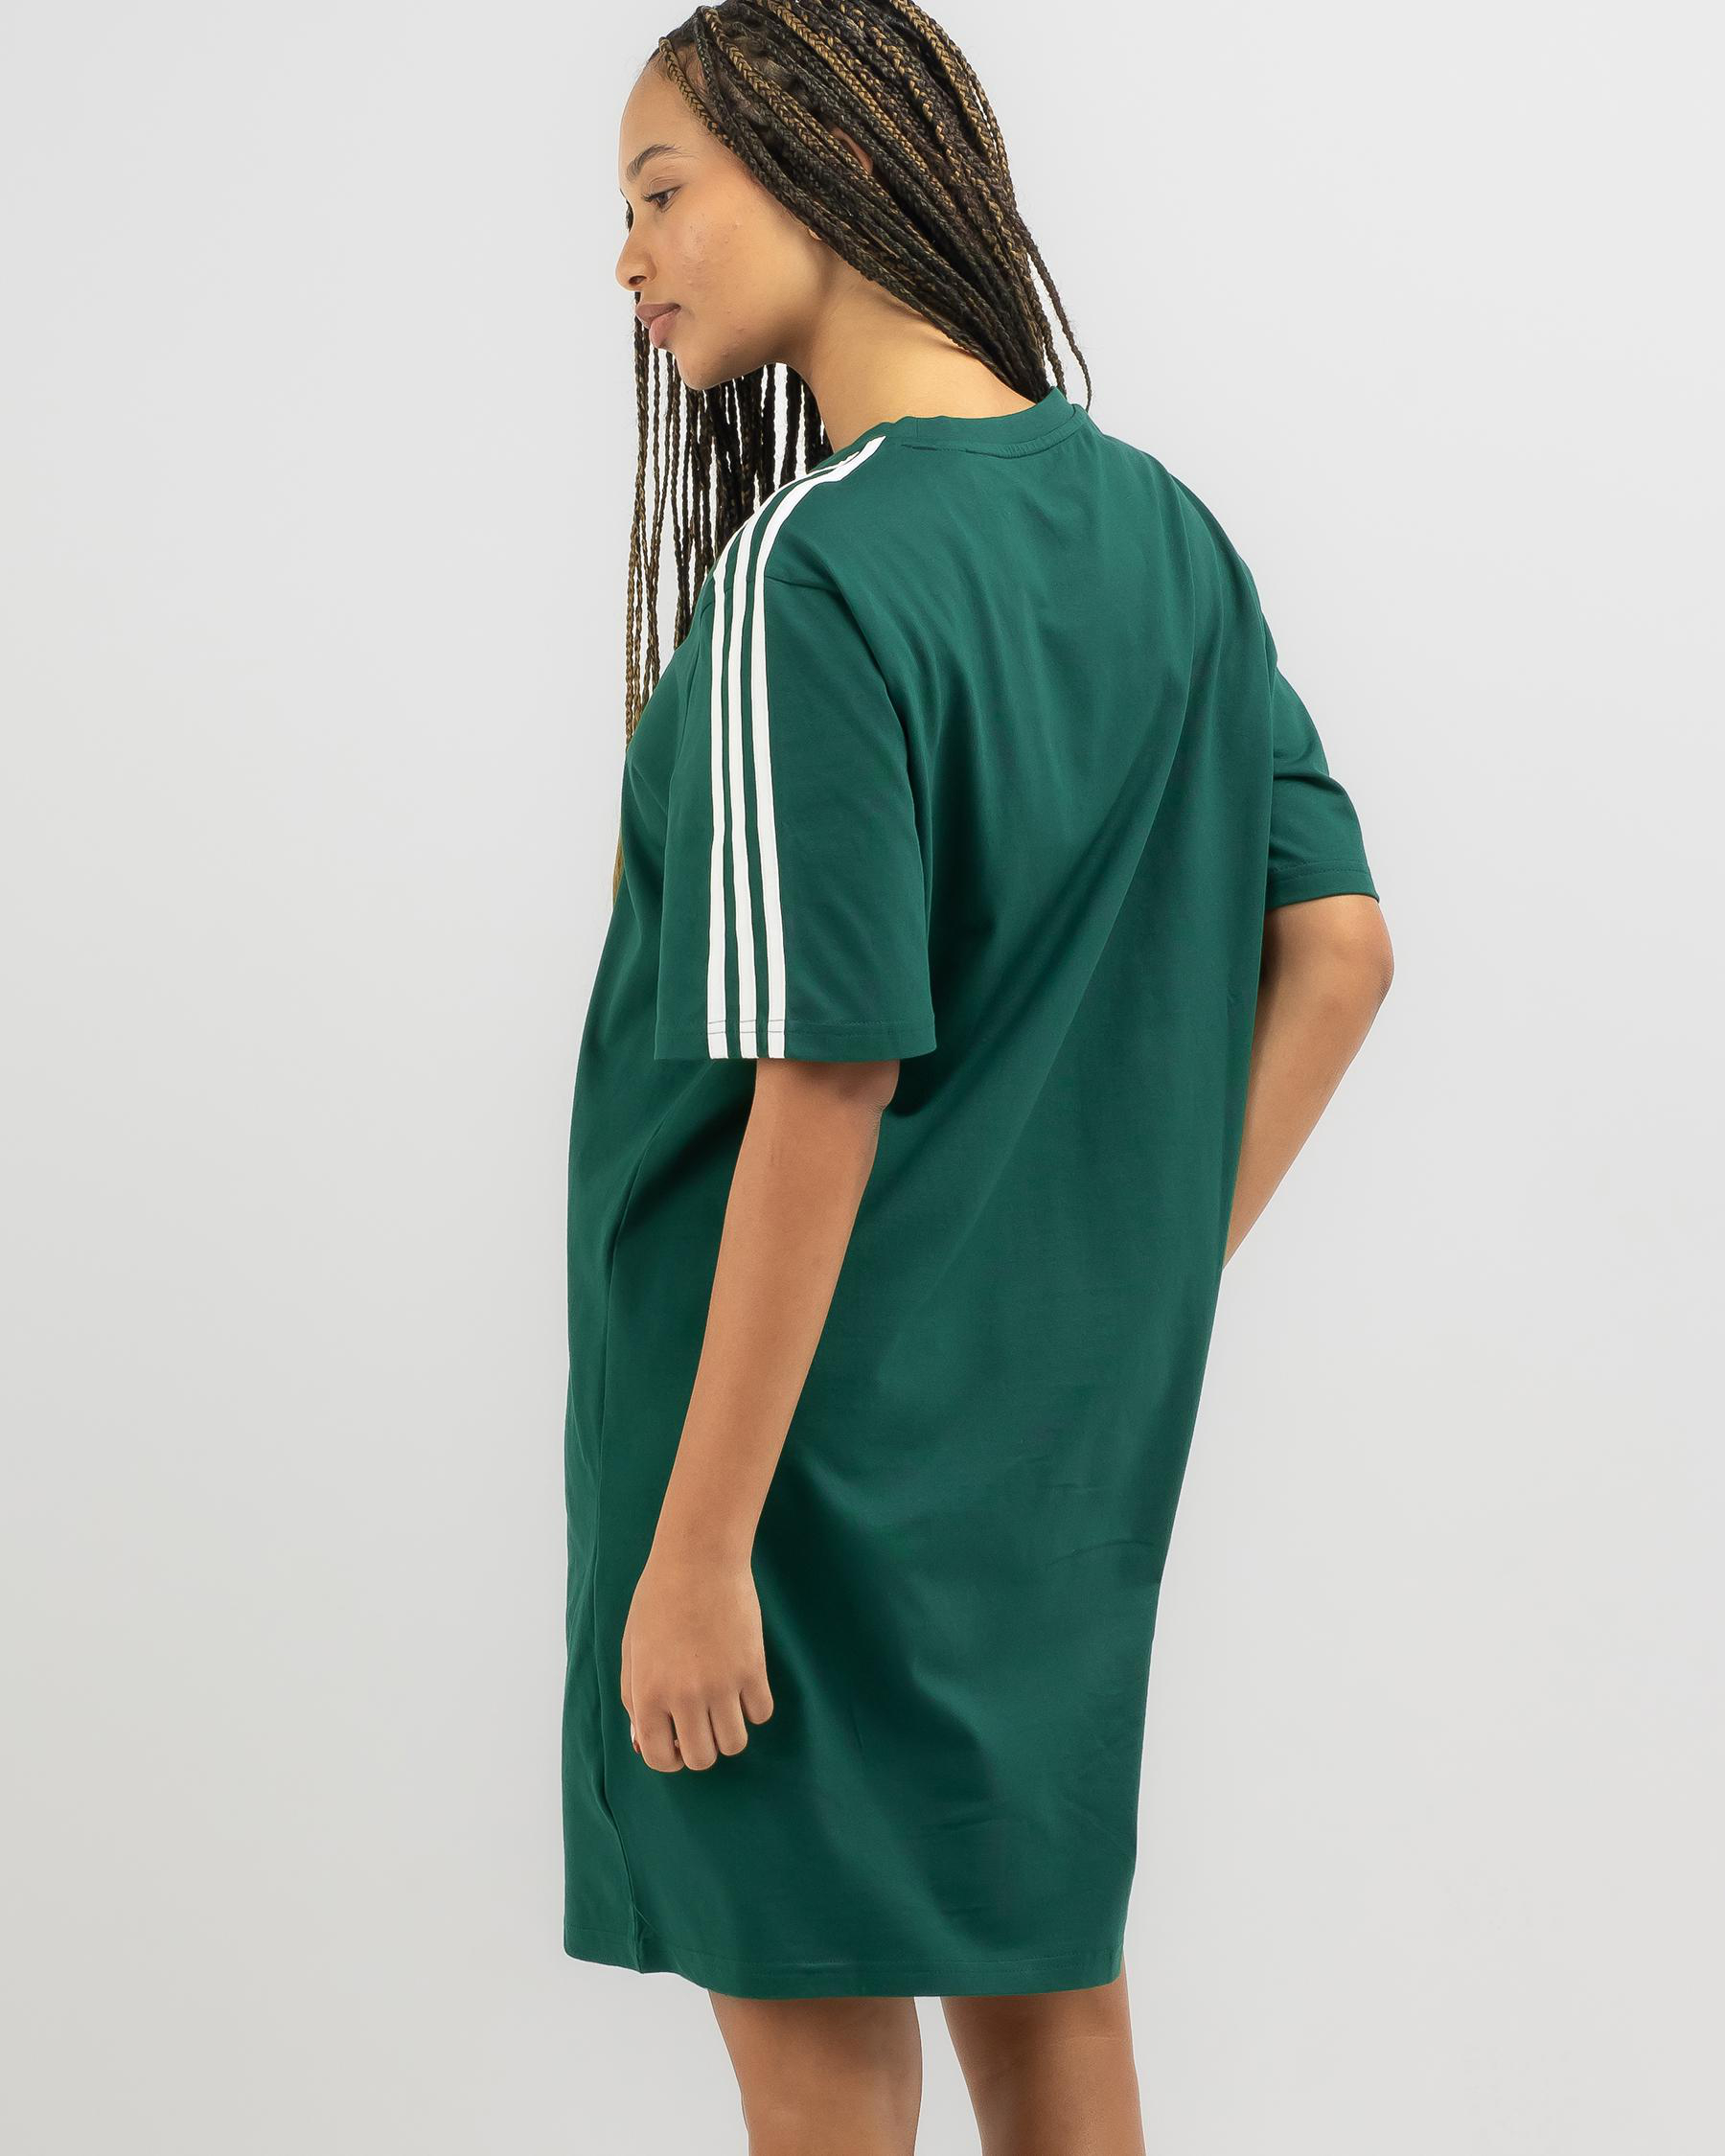 Adidas 3 T-Shirt Dress In Colliegiate Green/white - Fast Shipping & Returns - City Beach United States